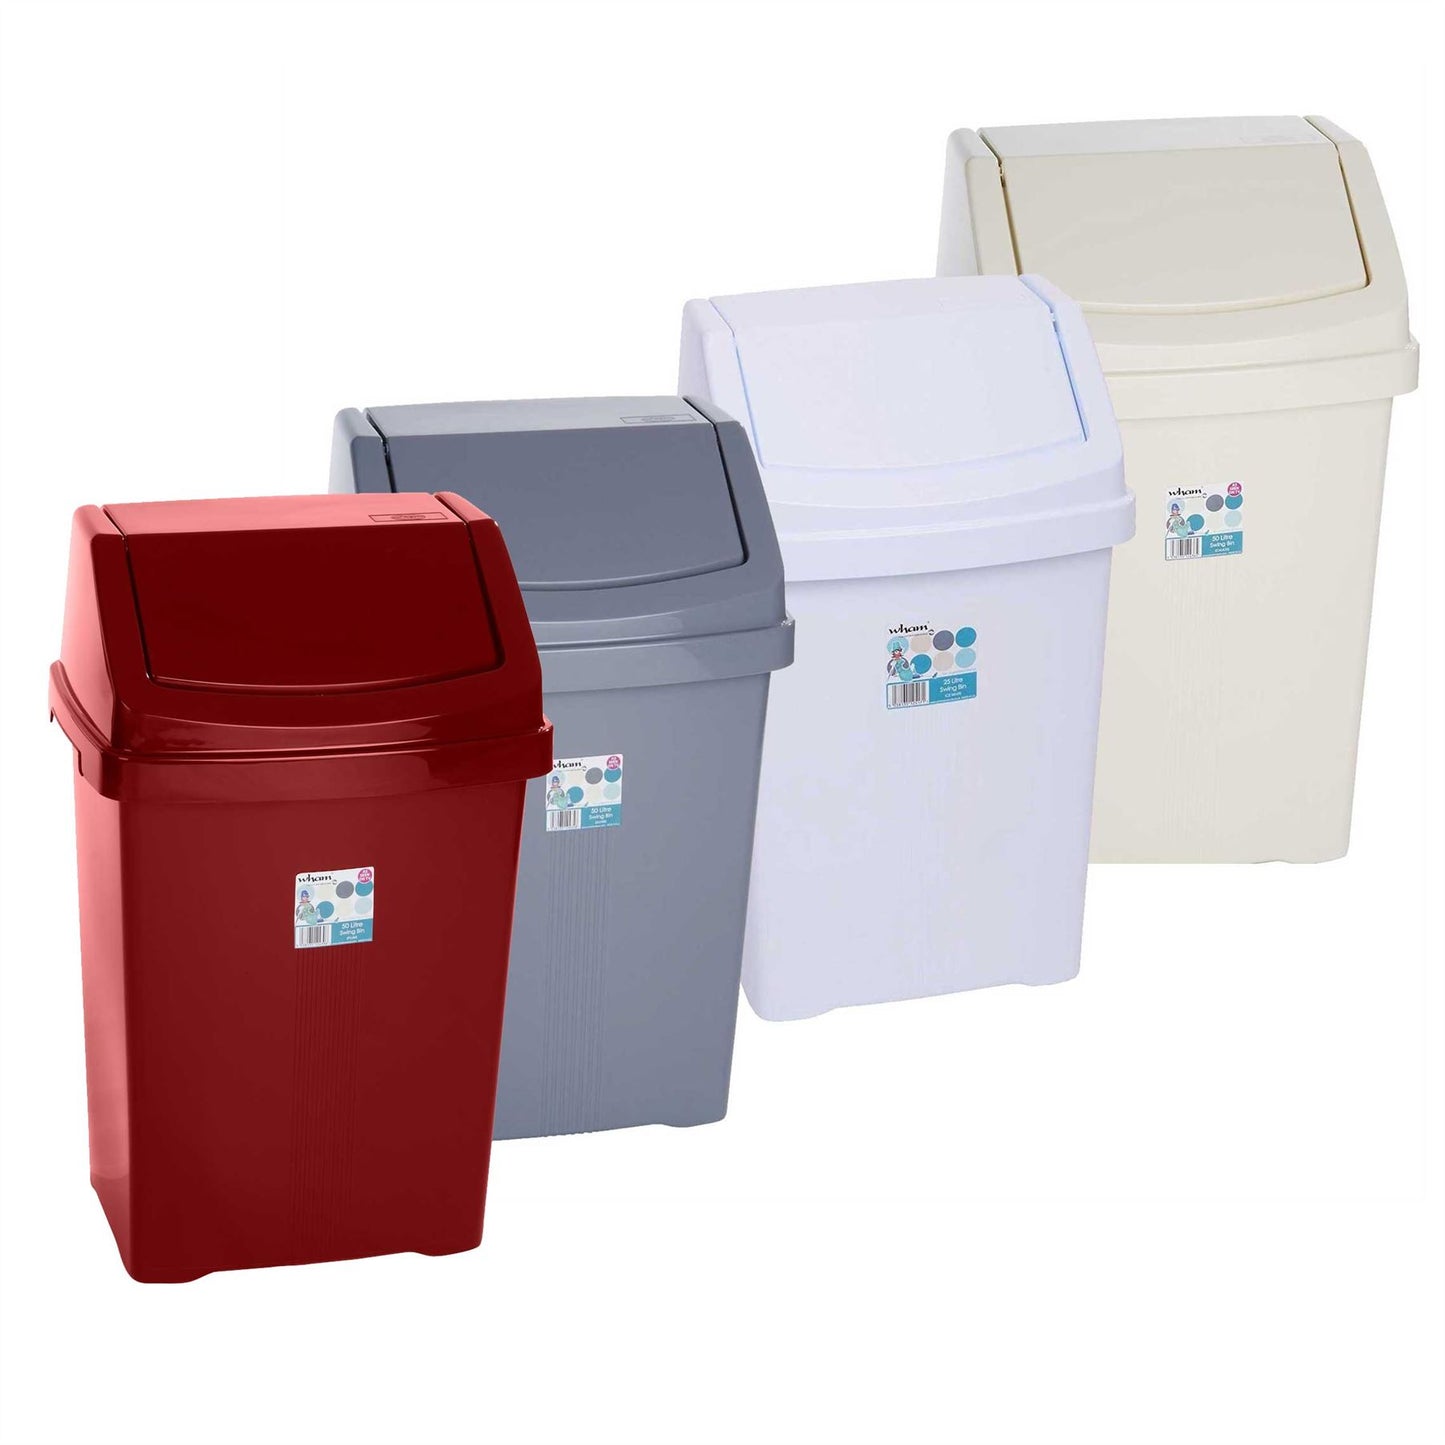 Dispose of Waste Easily with a Plastic Swing Top Bin